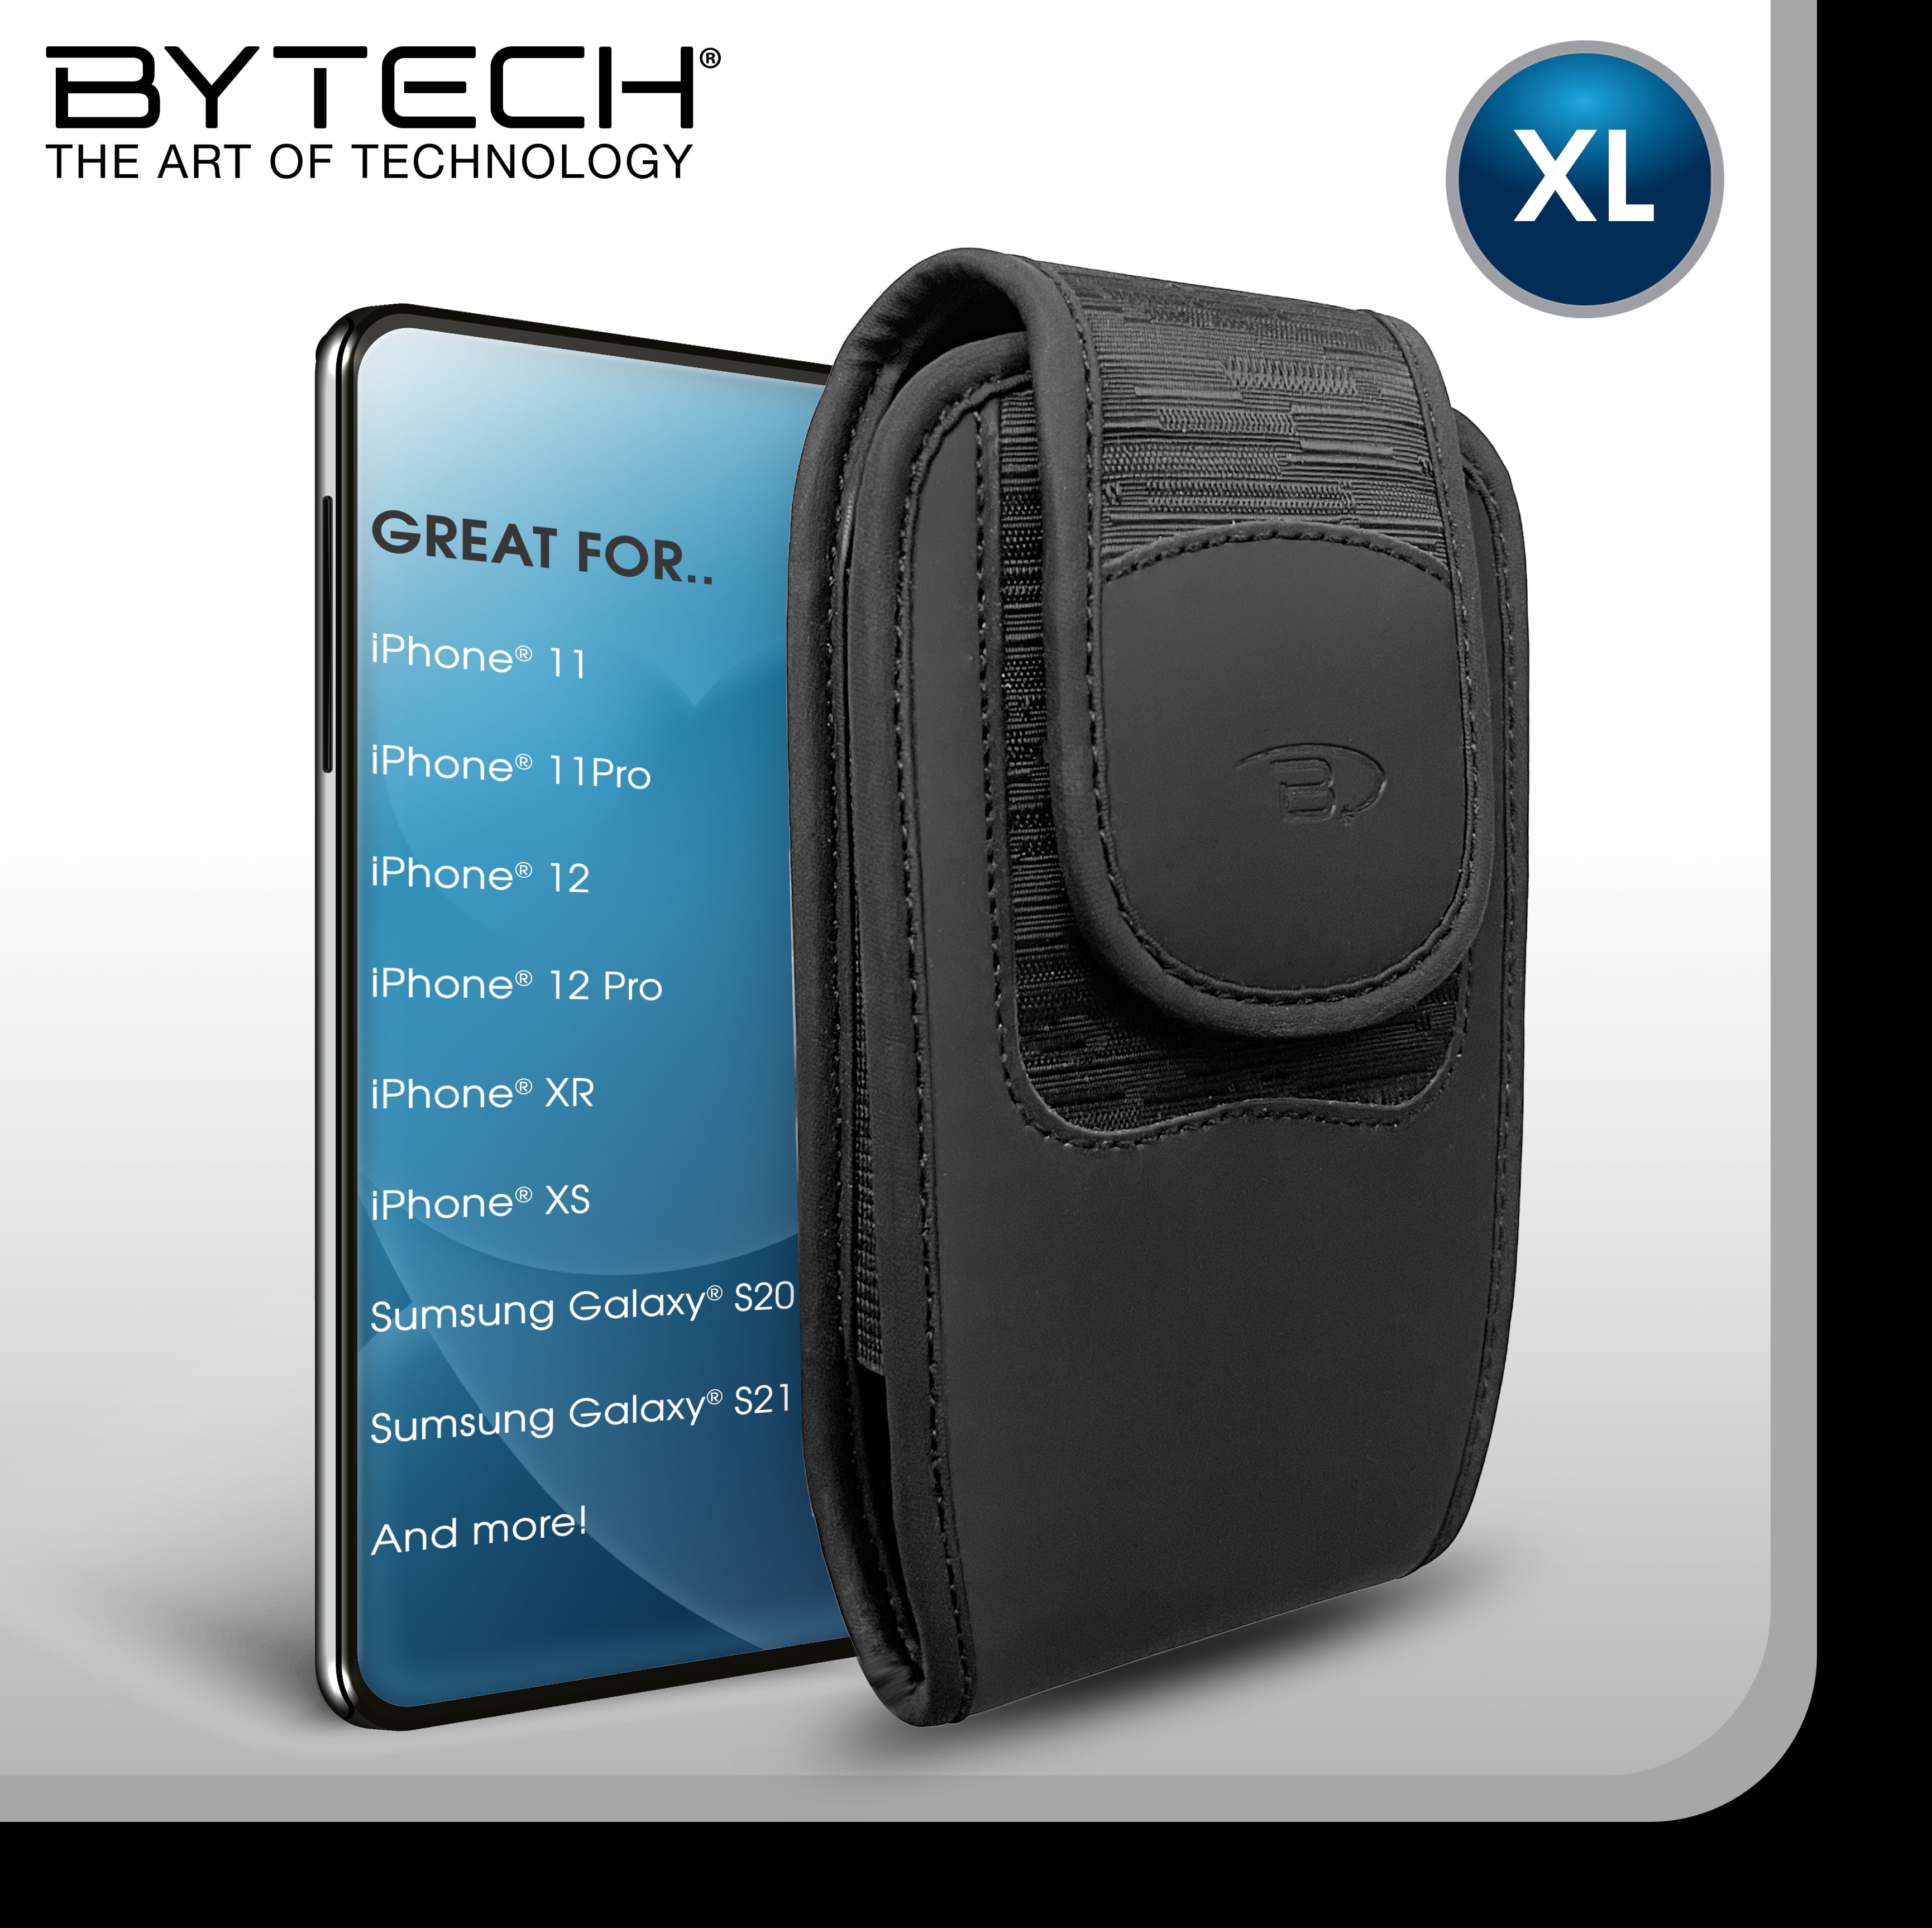 Bytech Extra Large Vertical Universal Smartphone Holster Case  Compatible with iPhone 11/11 Pro/12/12 Pro/XR/XS, Samsung Galaxy S20 Plus/S21 Plus